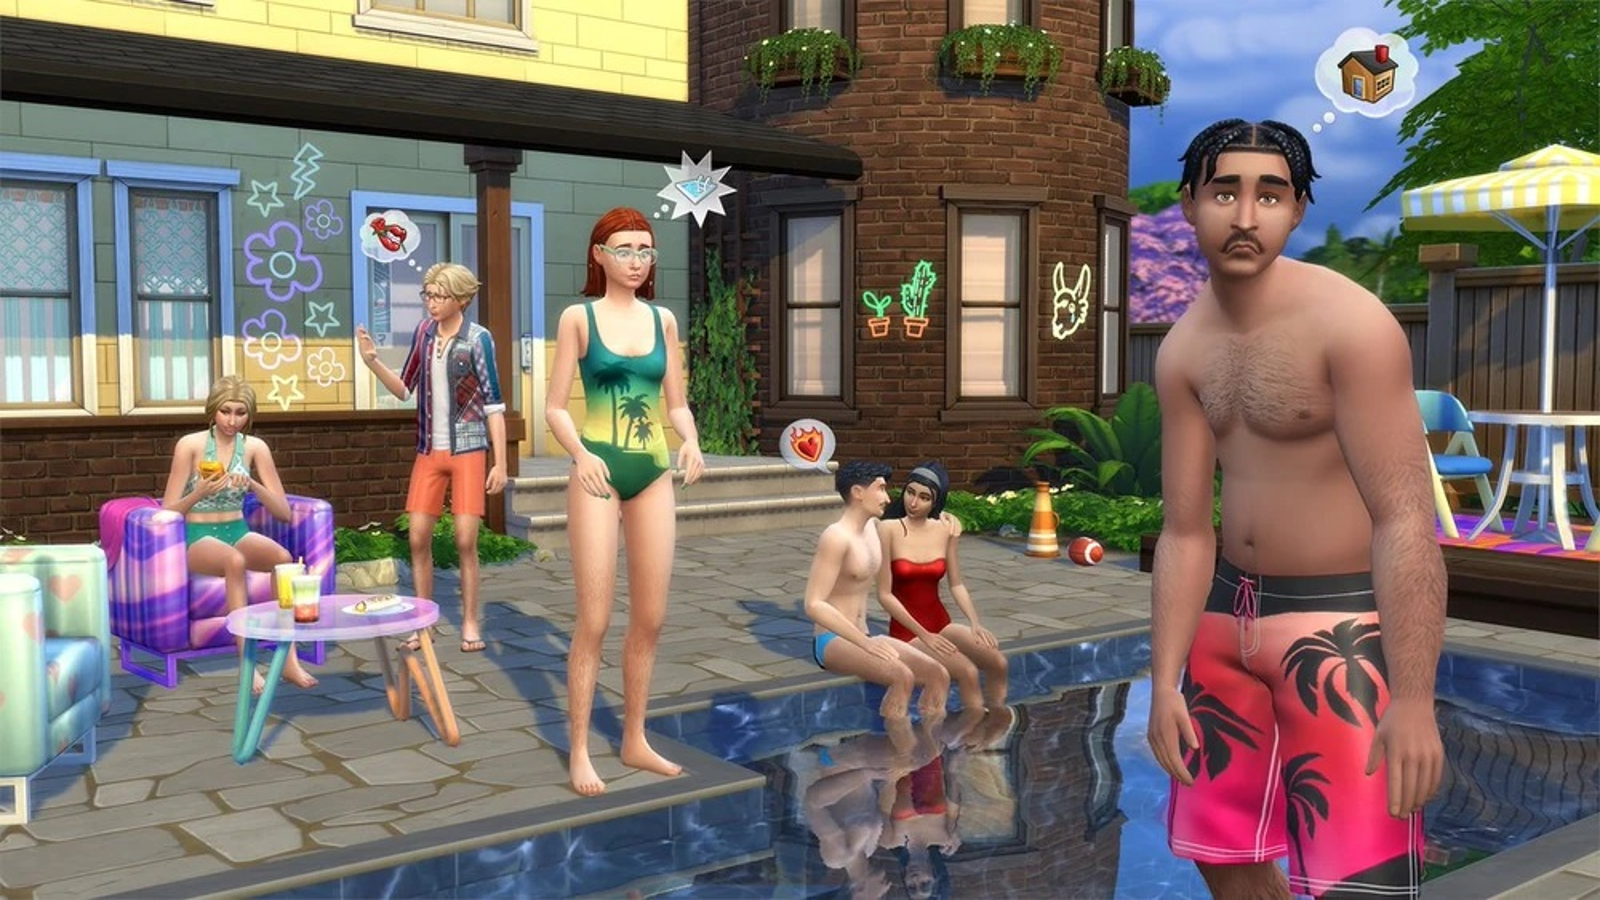 The Sims - Have you seen the new free Sims avatars and